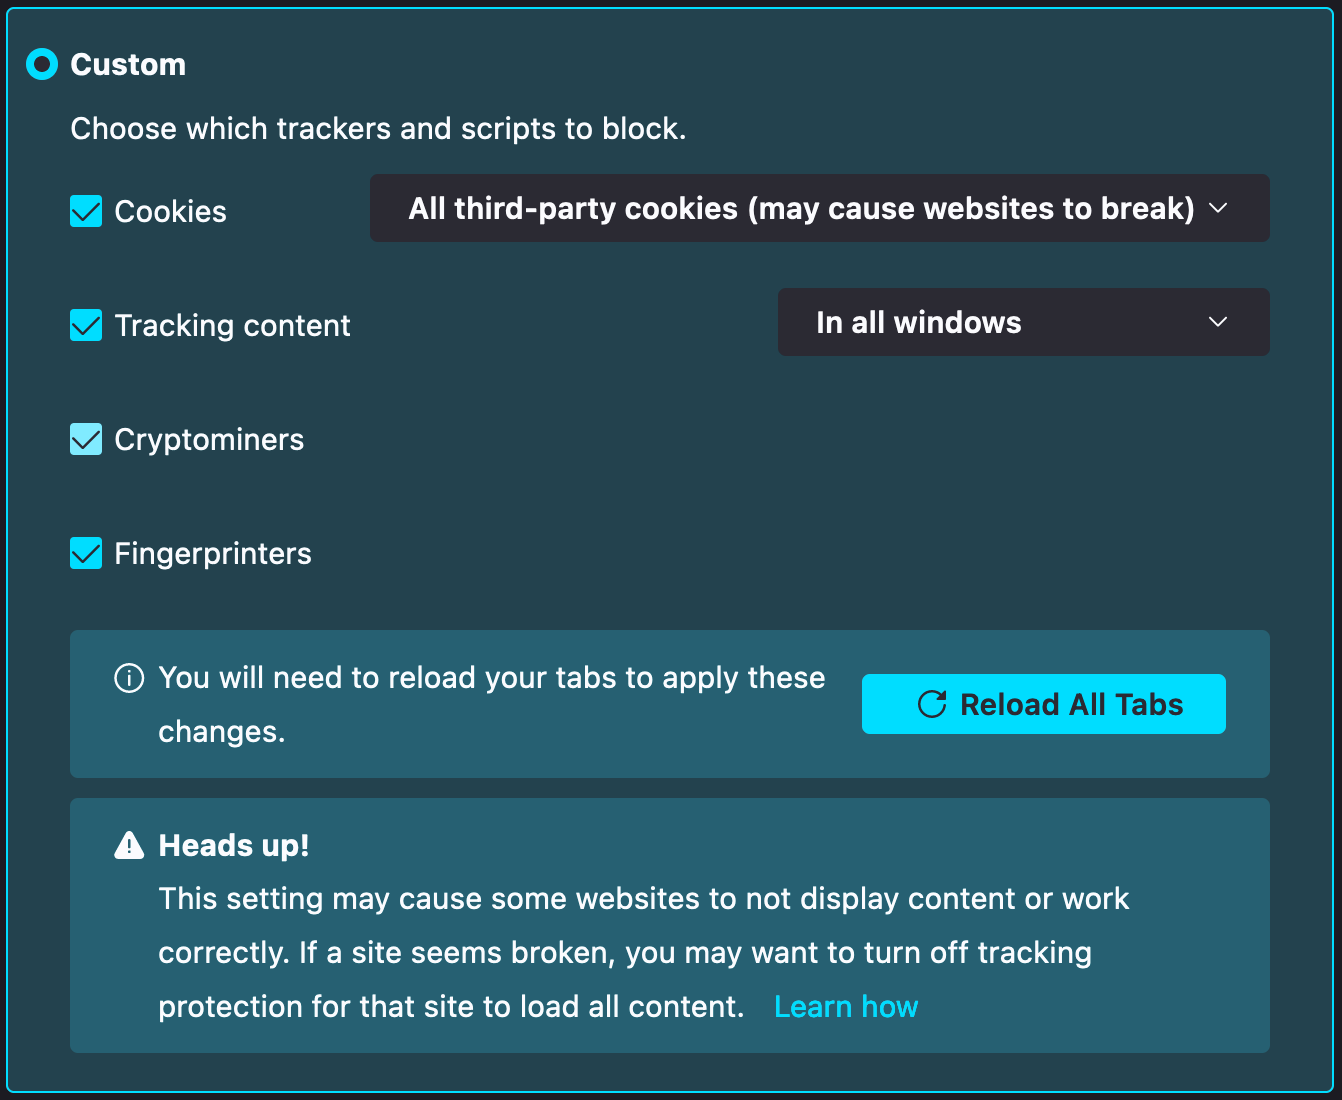 A screenshot of the Firefox Privacy & Security settings and the Enhanced Tracking Protection section. The Custom setting is selected, and the option to block all third-party cookies is chosen.